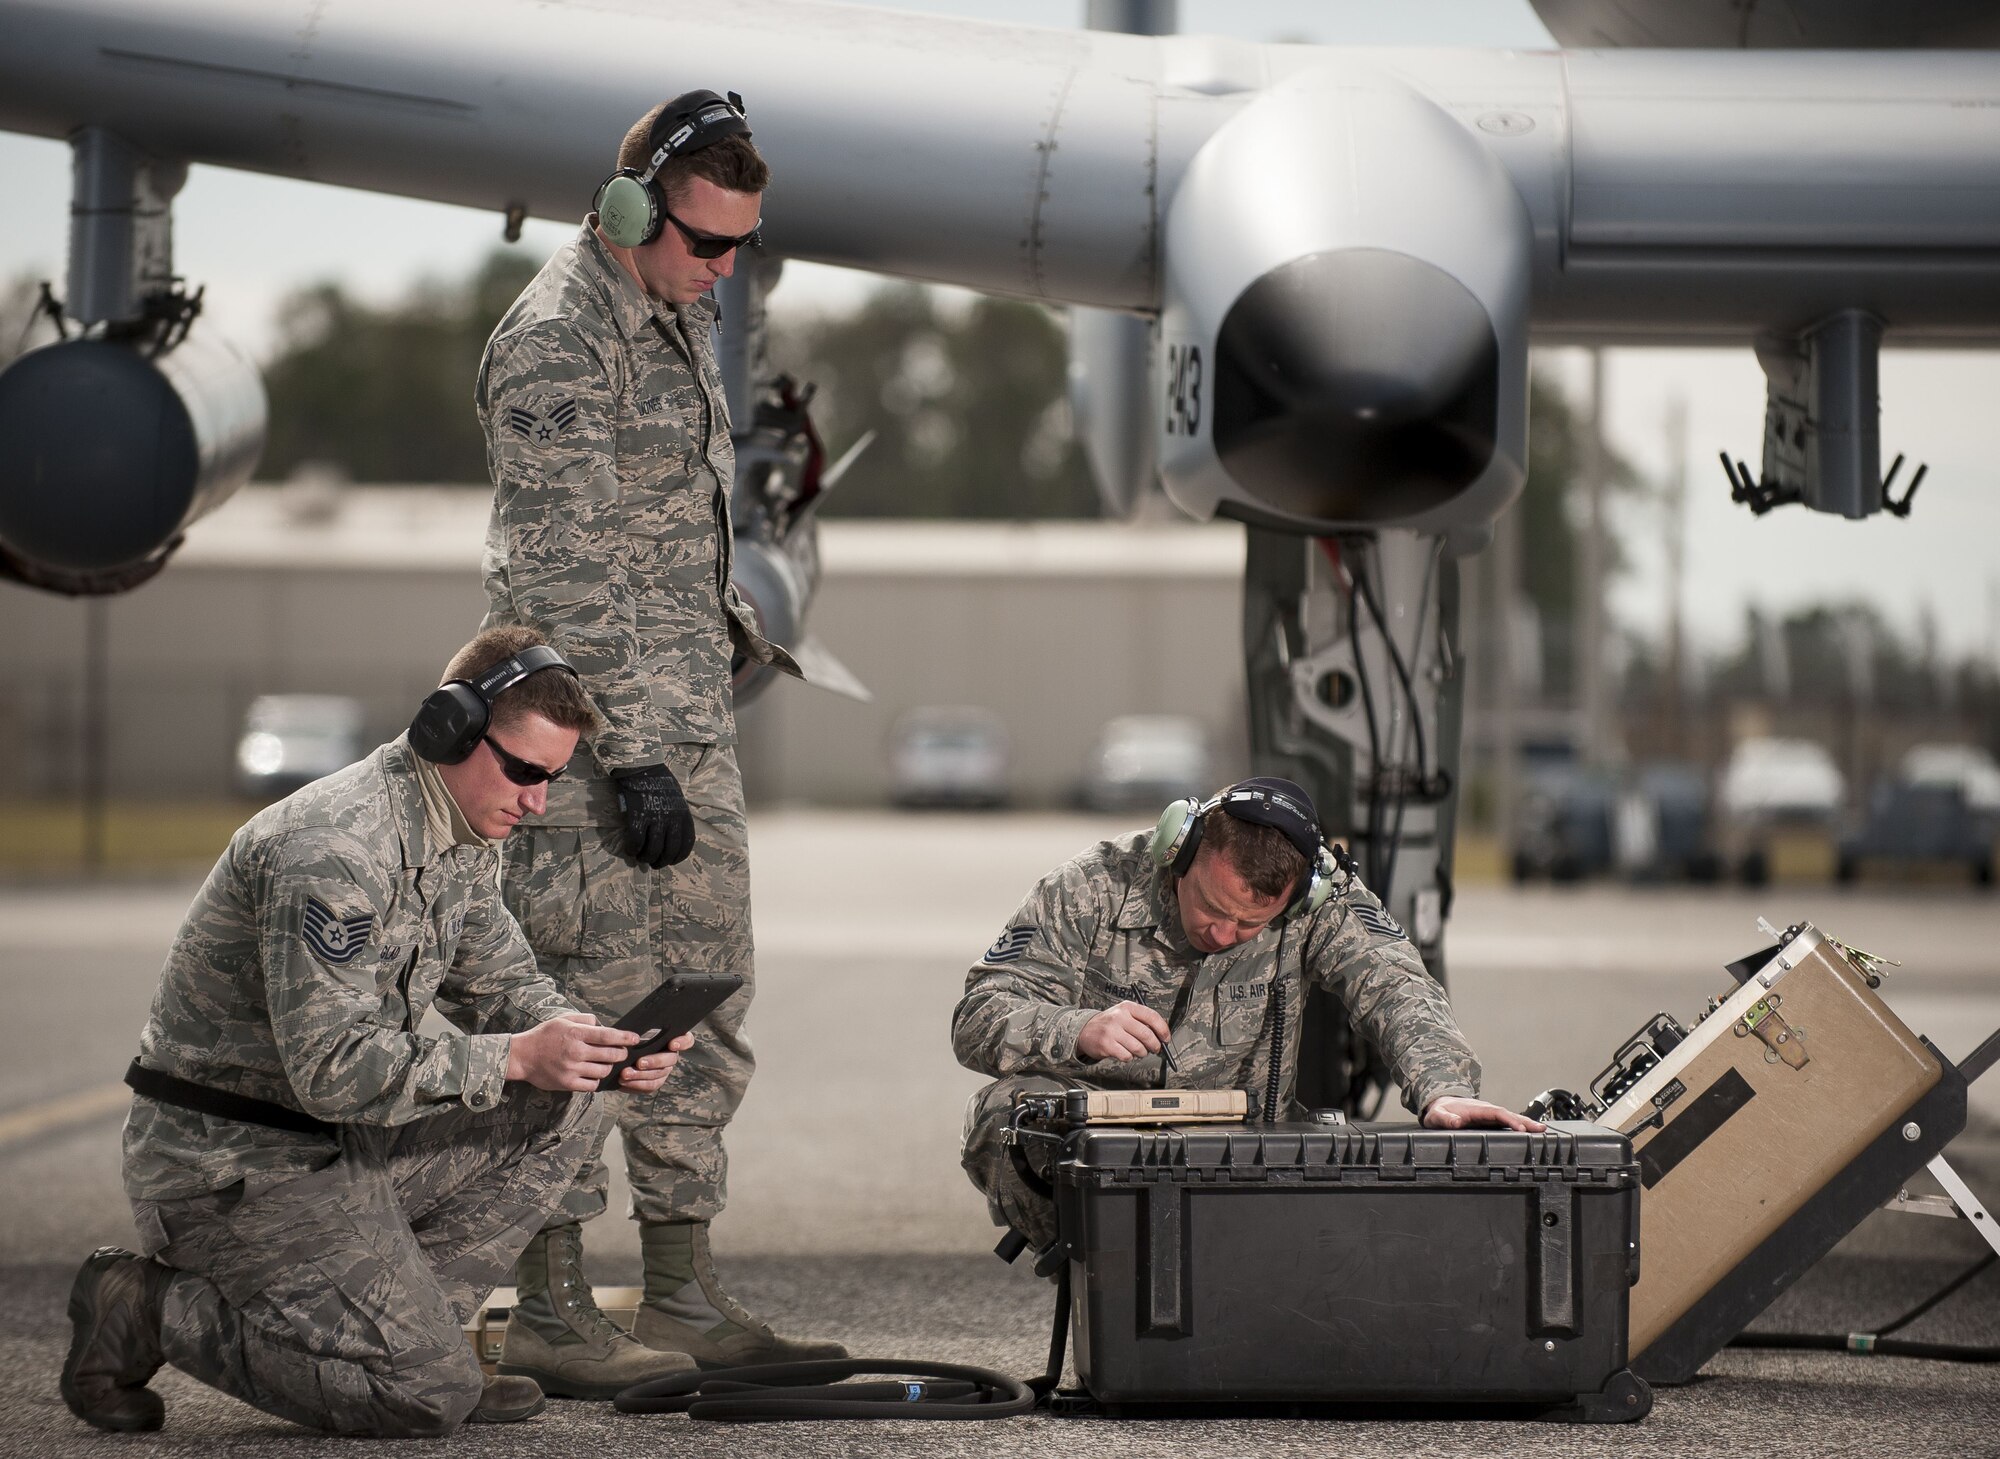 Tech. Sgt. Jack Glad, 122nd Weapons Load, left, Senior Airman Logan Jones, 122nd Avionics, and Tech. Sgt. Mathew Habart, 122nd Avionics, from the 122nd Fighter Wing, Fort Wayne, Ind.,  upload avionics software to an A-10C Thunderbolt II “Warthog” during Operation Guardian Blitz, Jan 25, 2018, at MacDill Air Force Base, Fla. Guardian Blitz is a two-week joint exercise to improve service interoperability for combat search and rescue and close air support. (U.S. Air National Guard photo by Staff Sgt. William Hopper/Released)